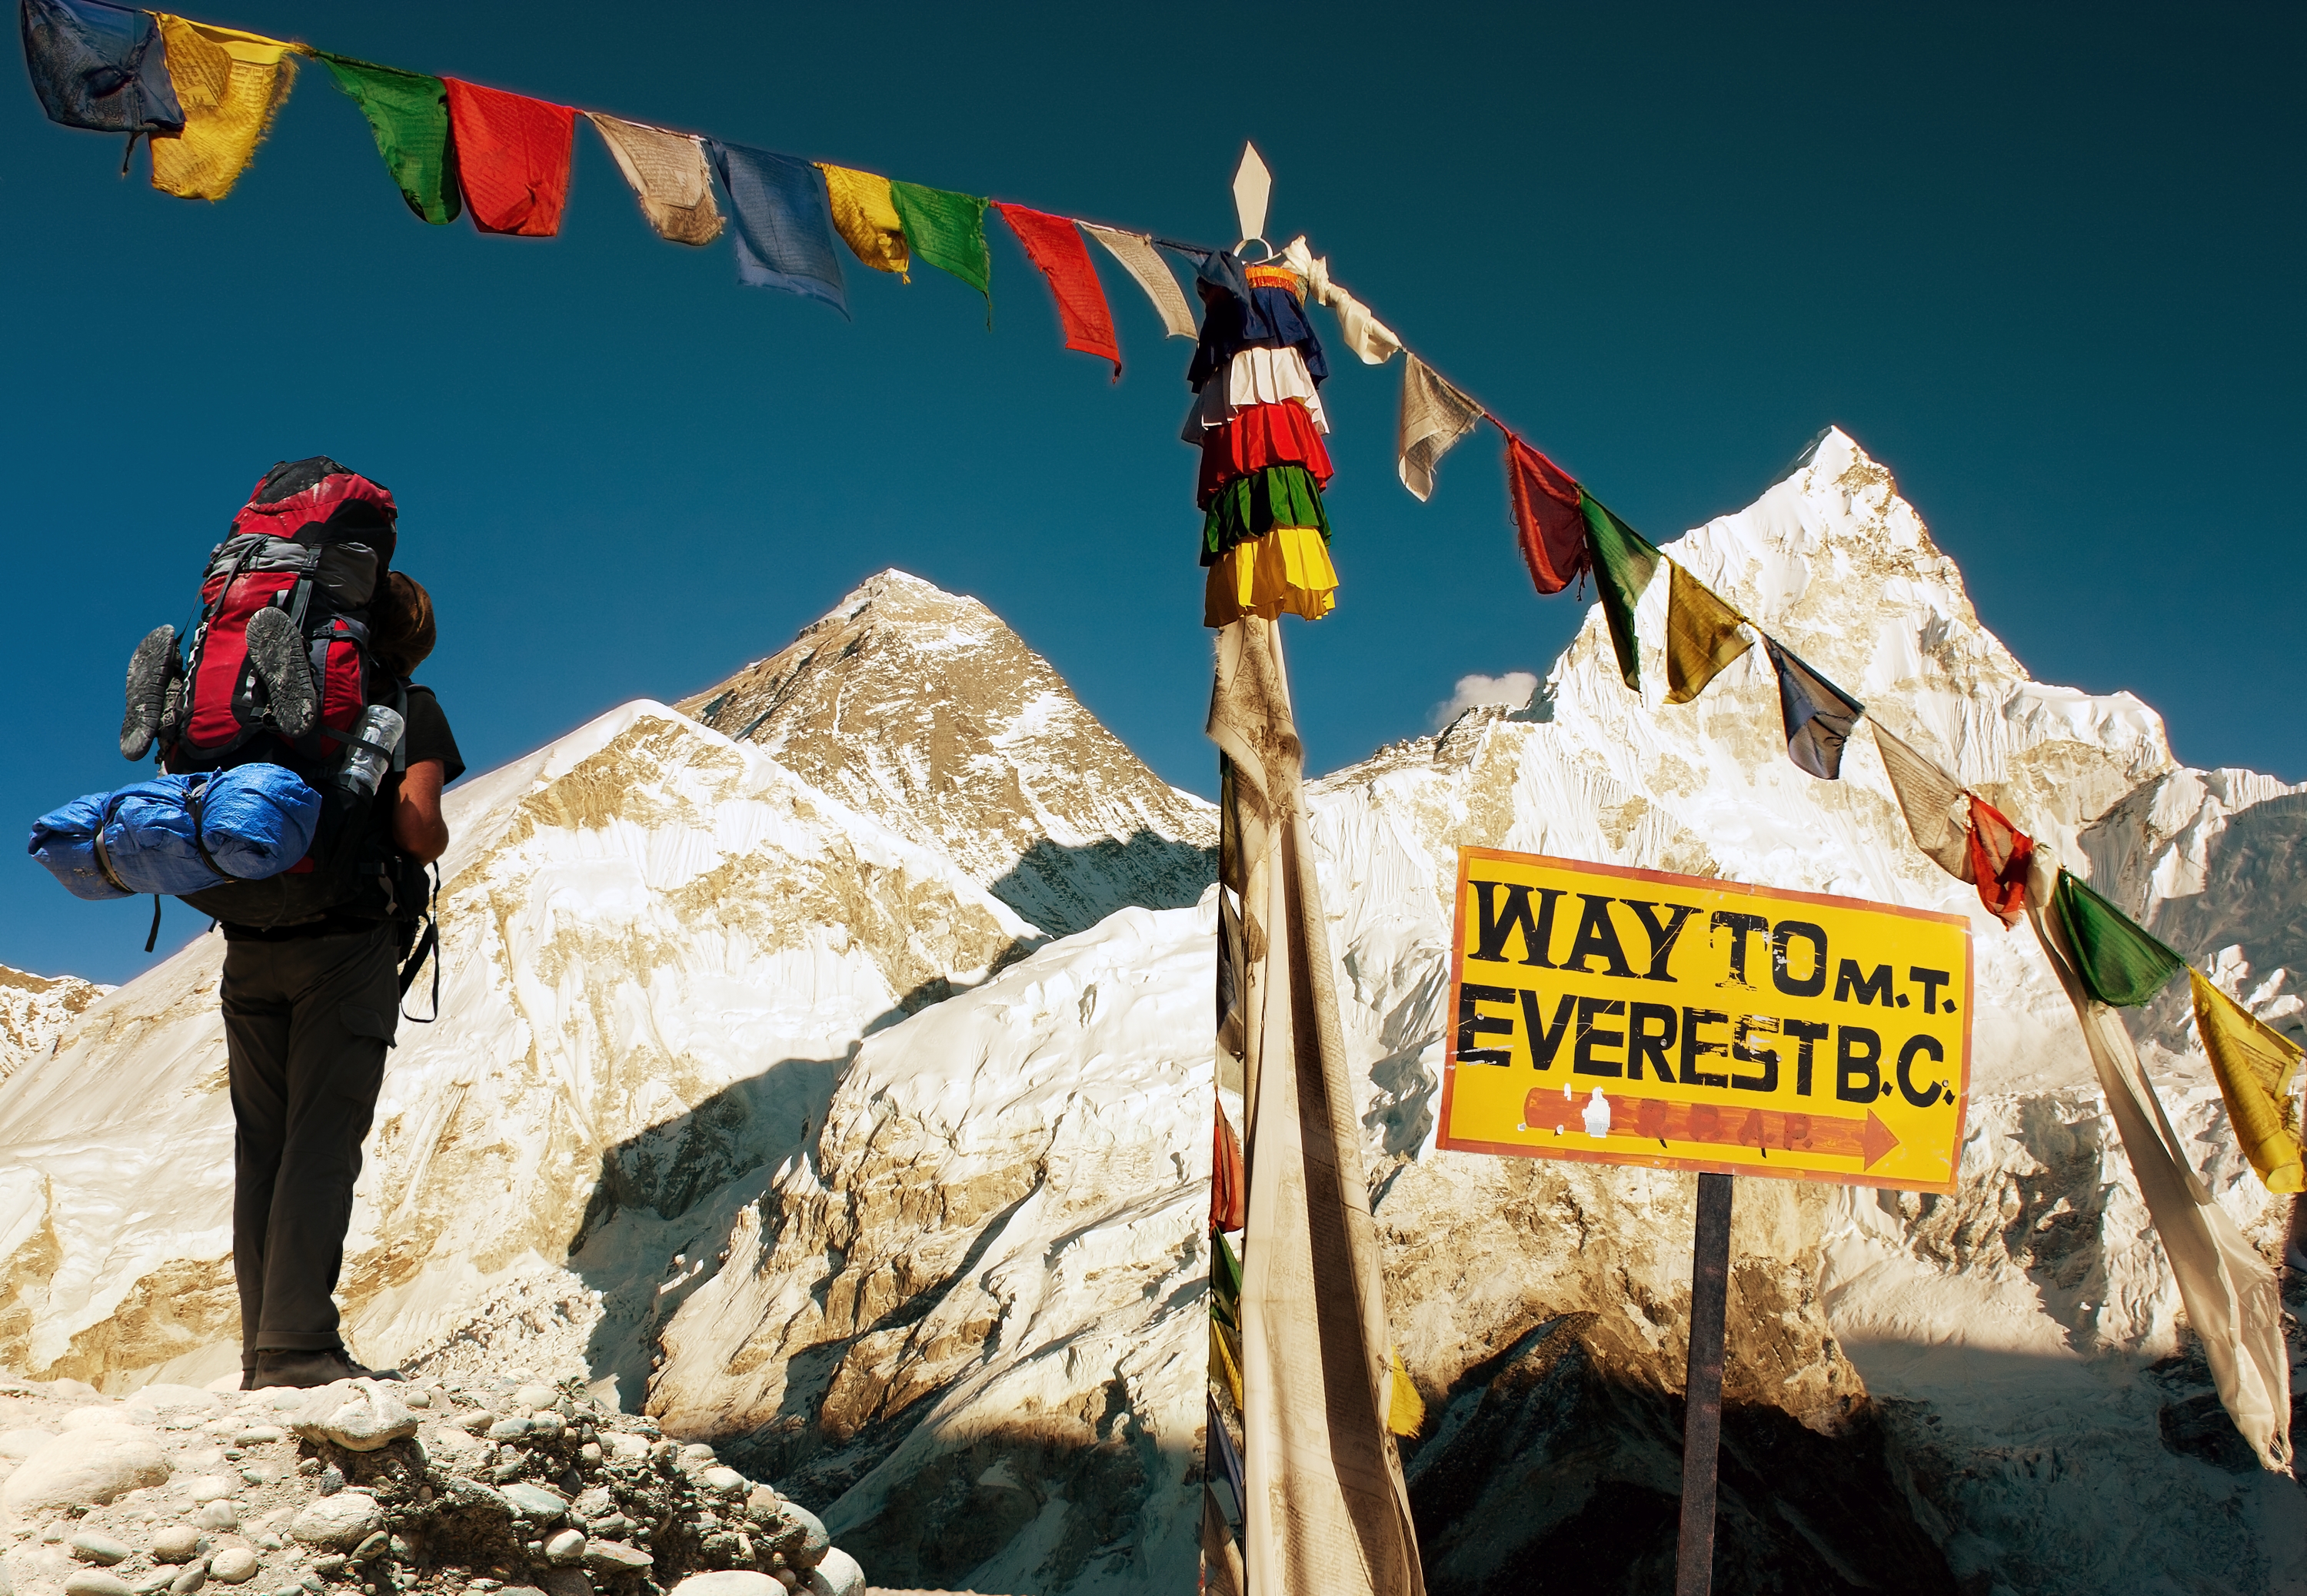 Thrilling Family Vacation Activities - Hiking to Mount Everest Base Camp